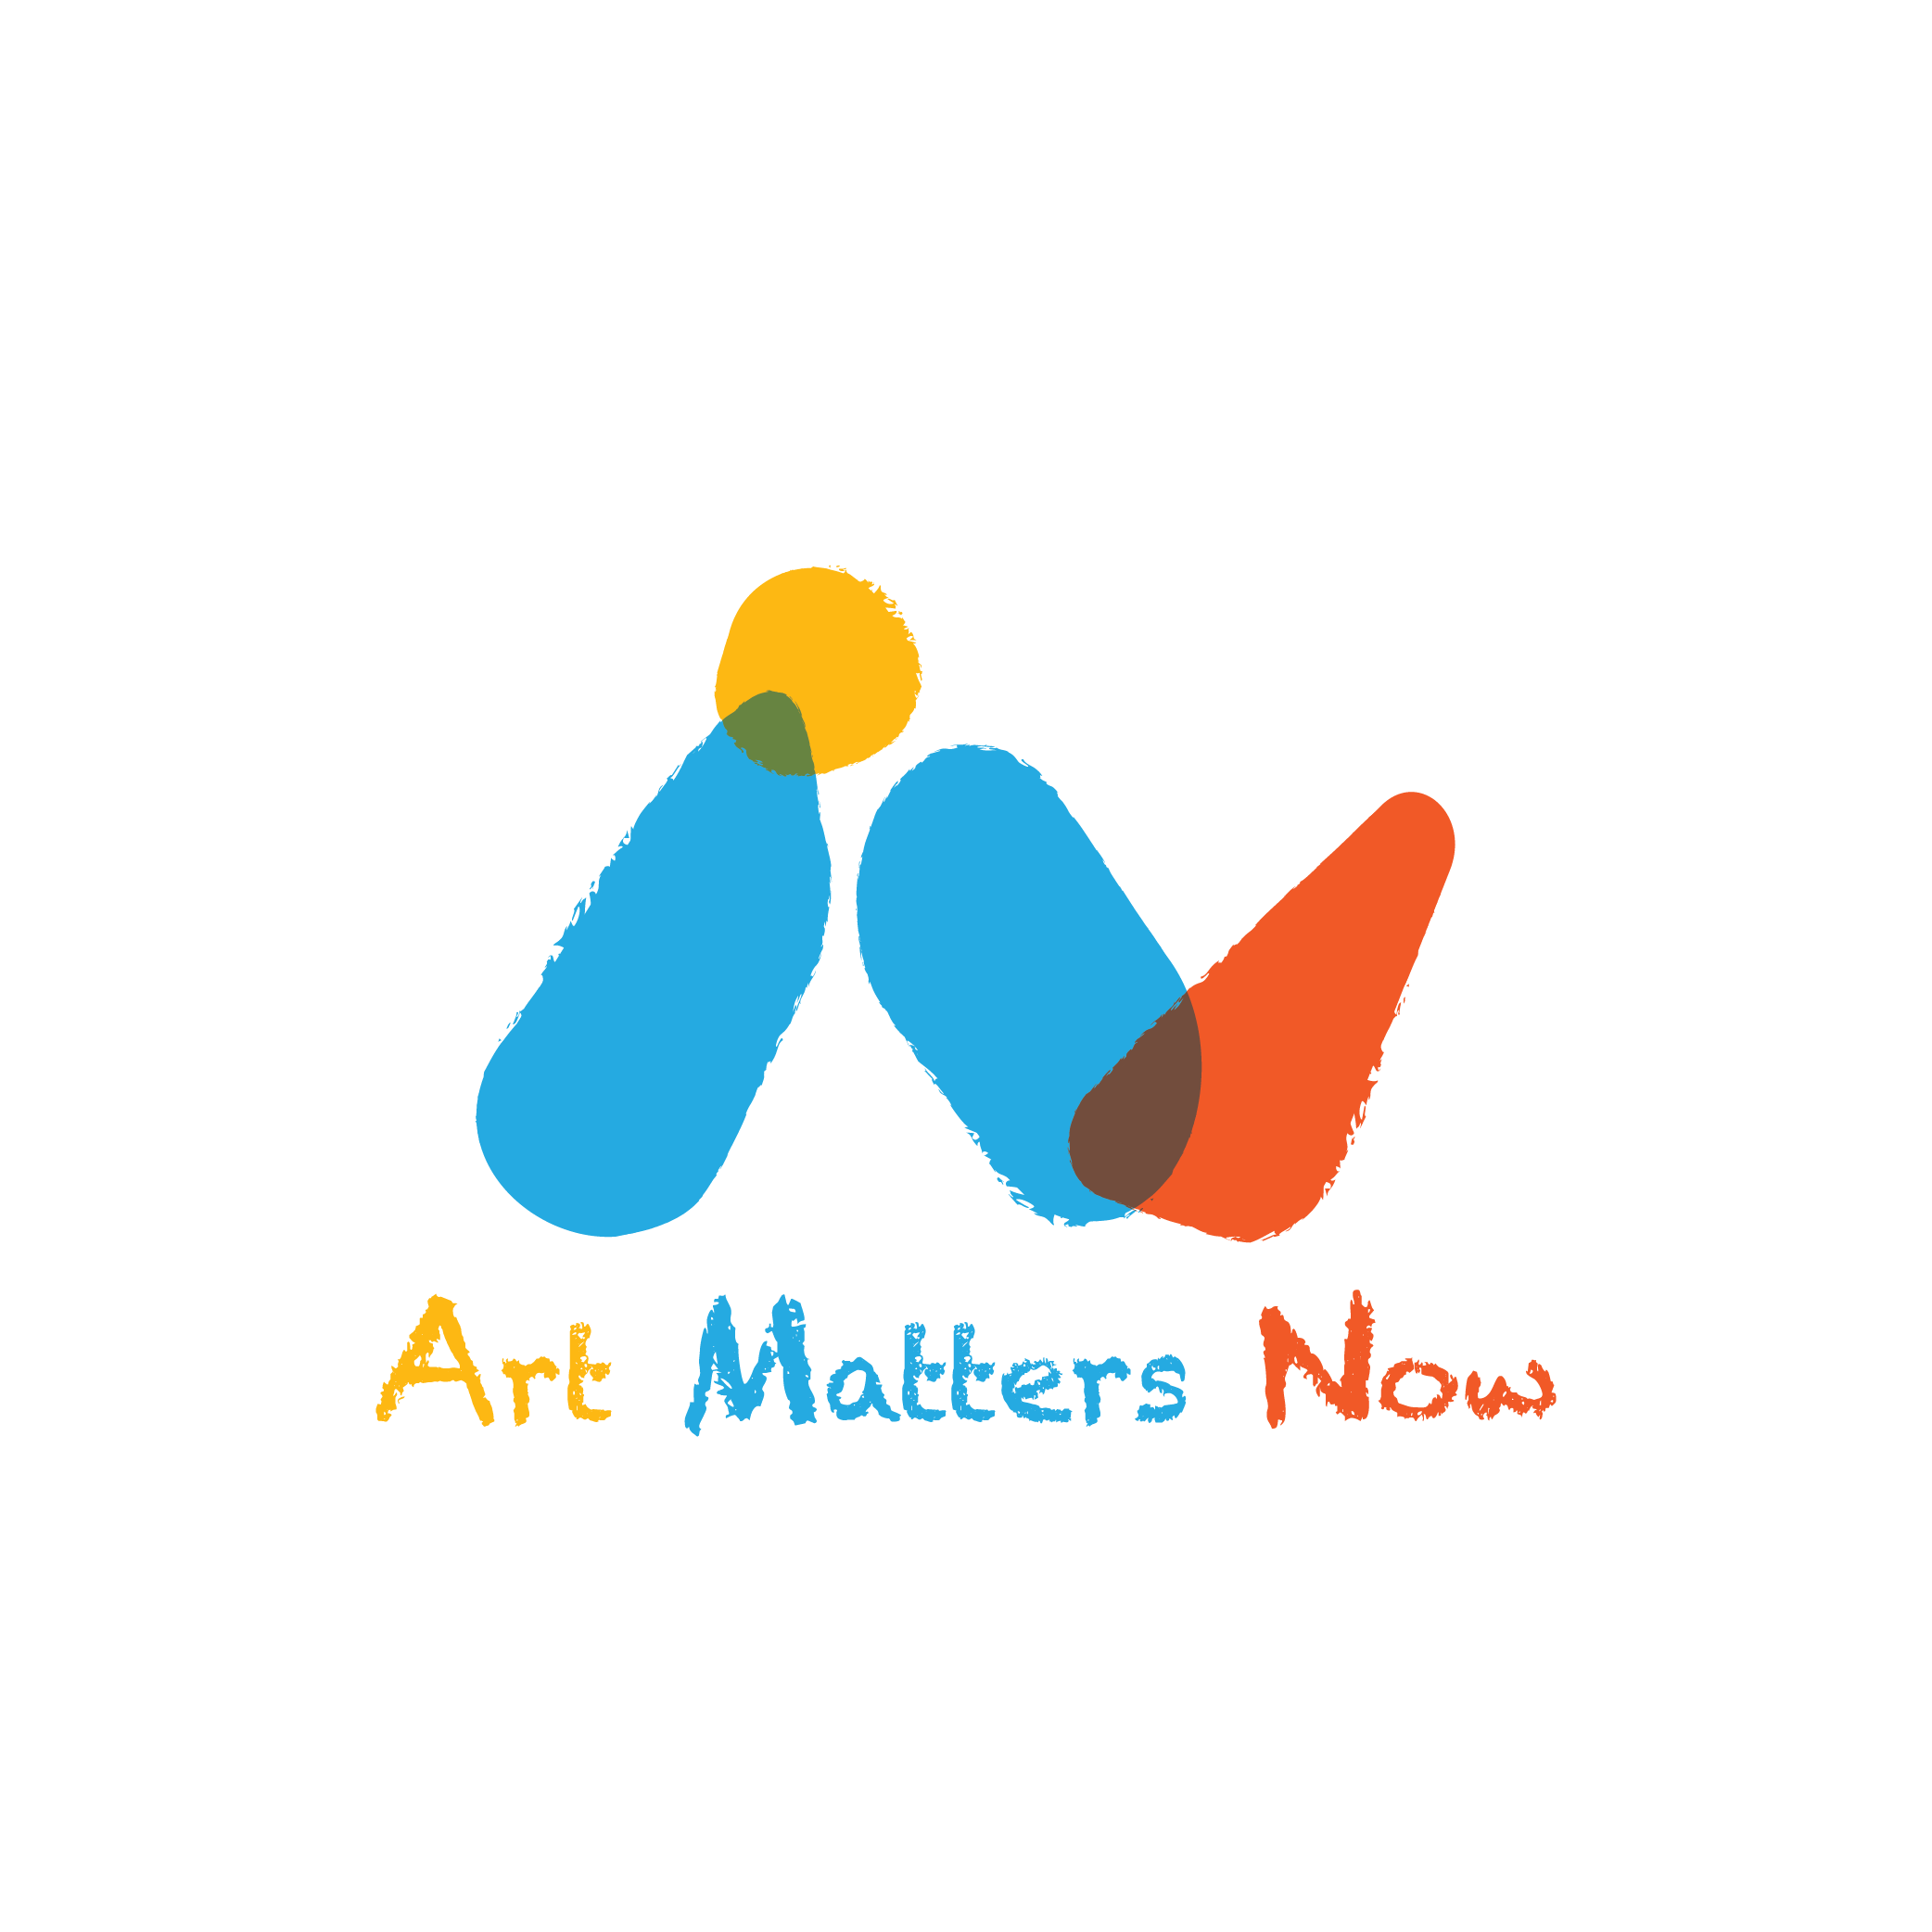 Coloured logo of Art Matters Now